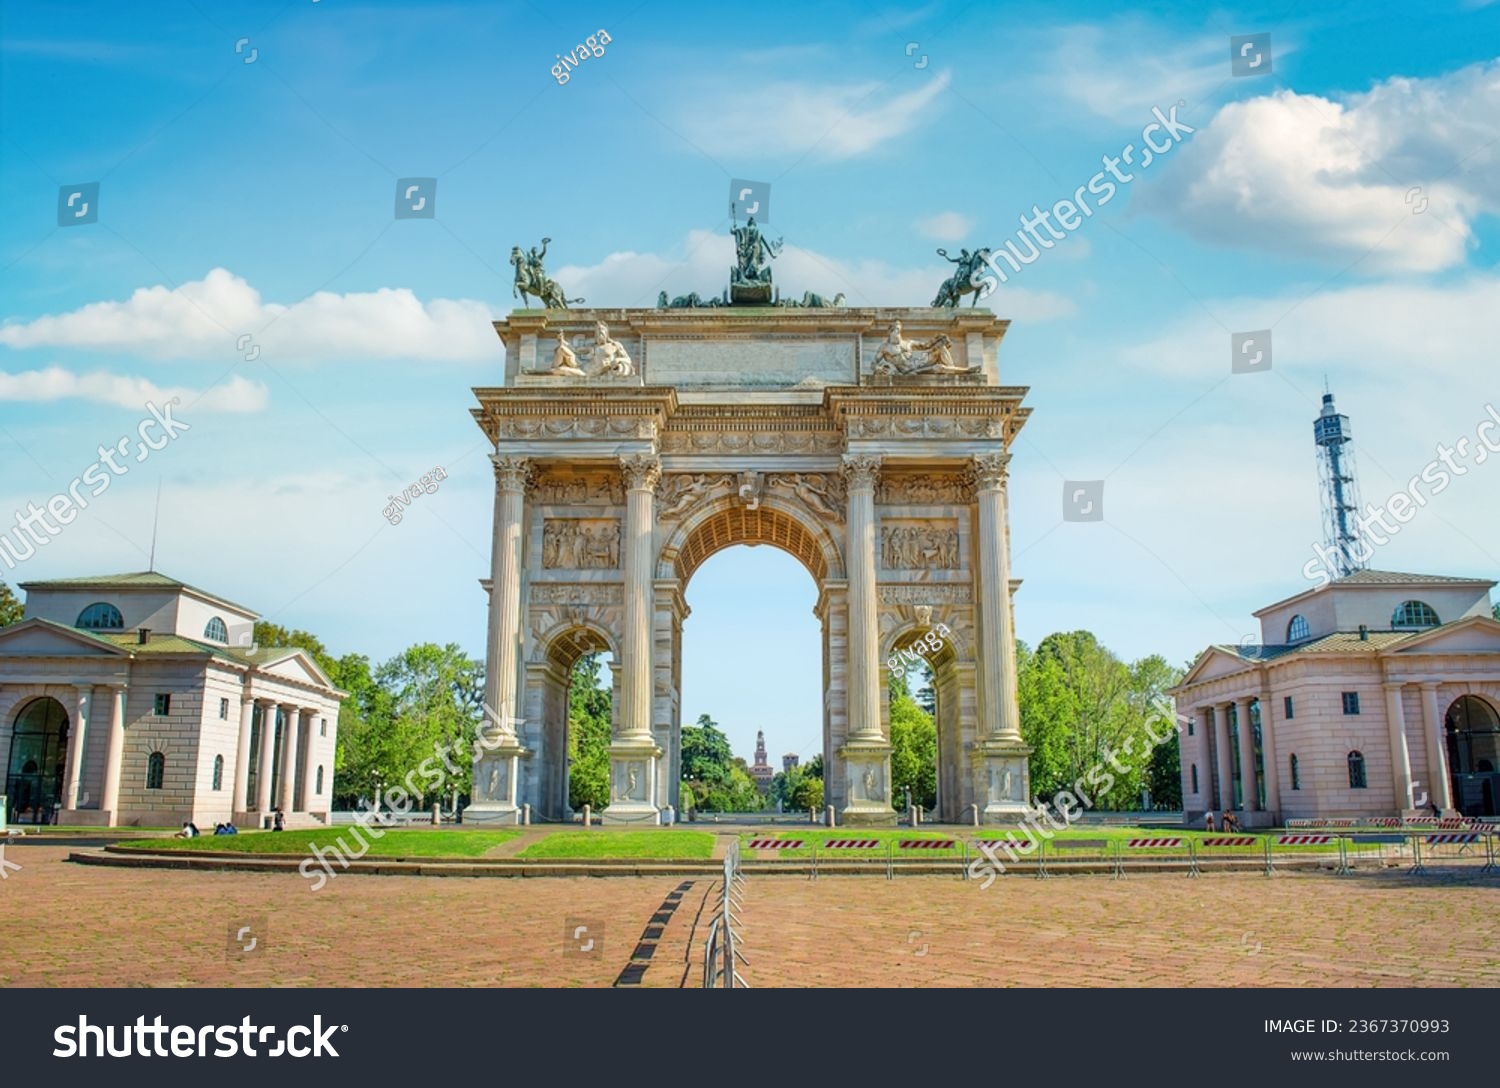 Arch of Peace in sempione park, Milan, lombardy, Italy #2367370993